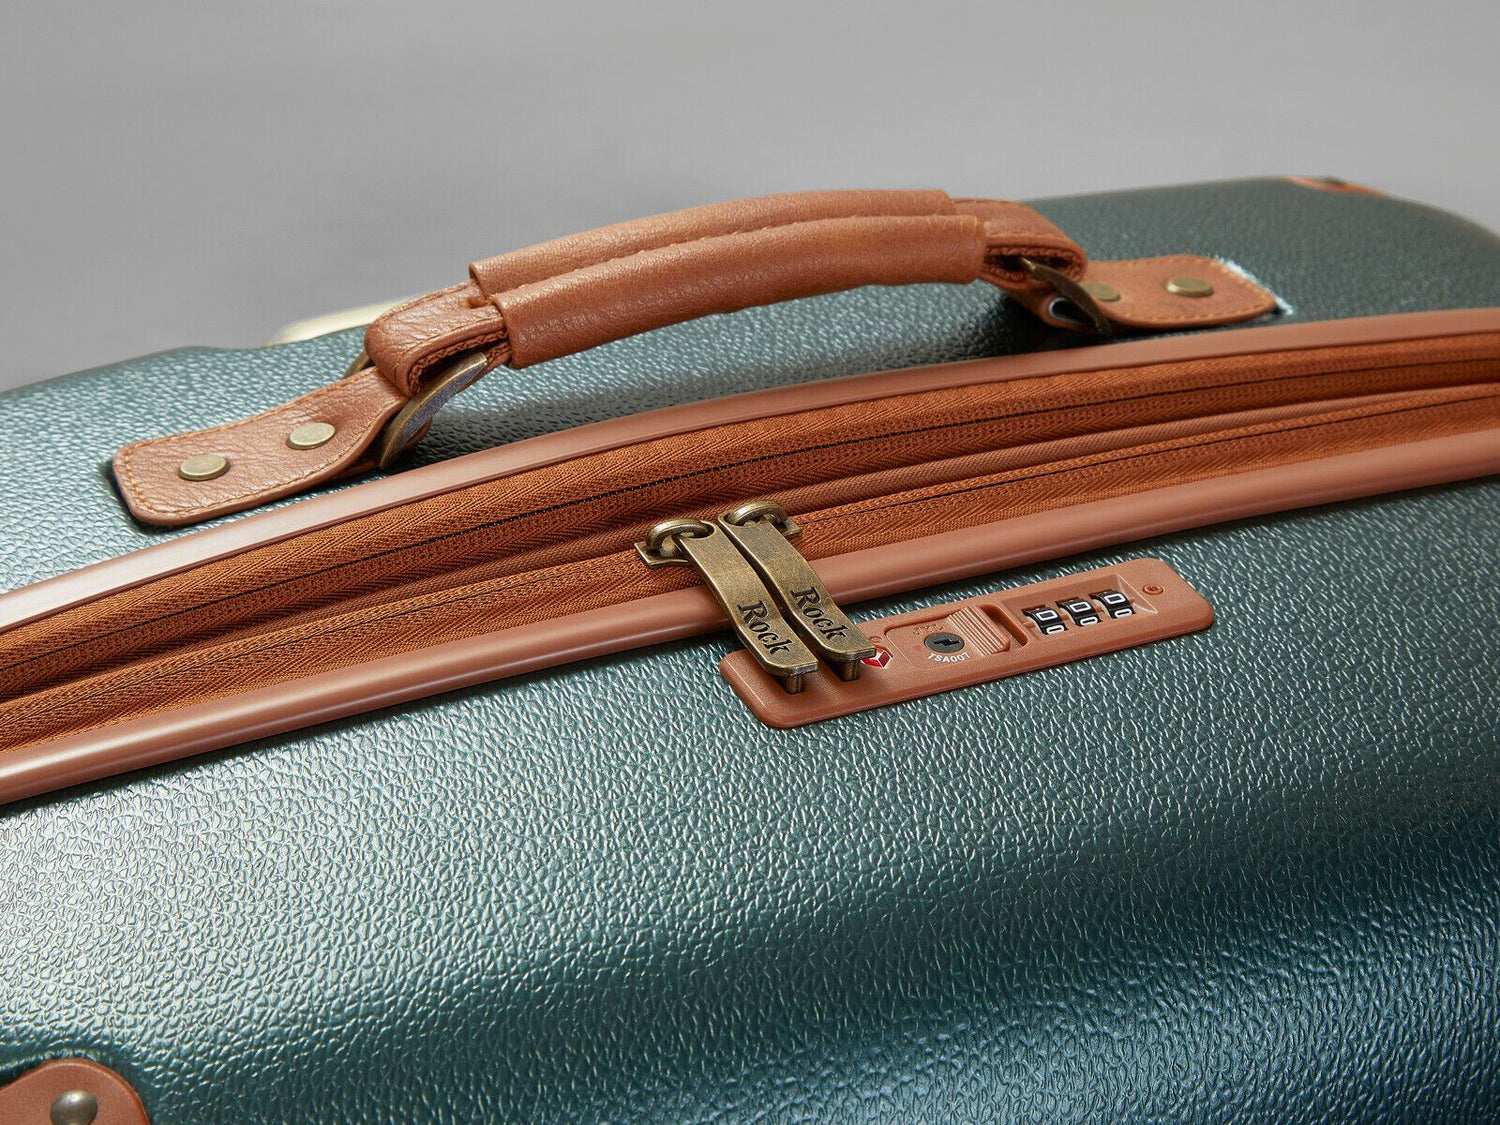 Anderson Medium Hard Shell Suitcase in Green